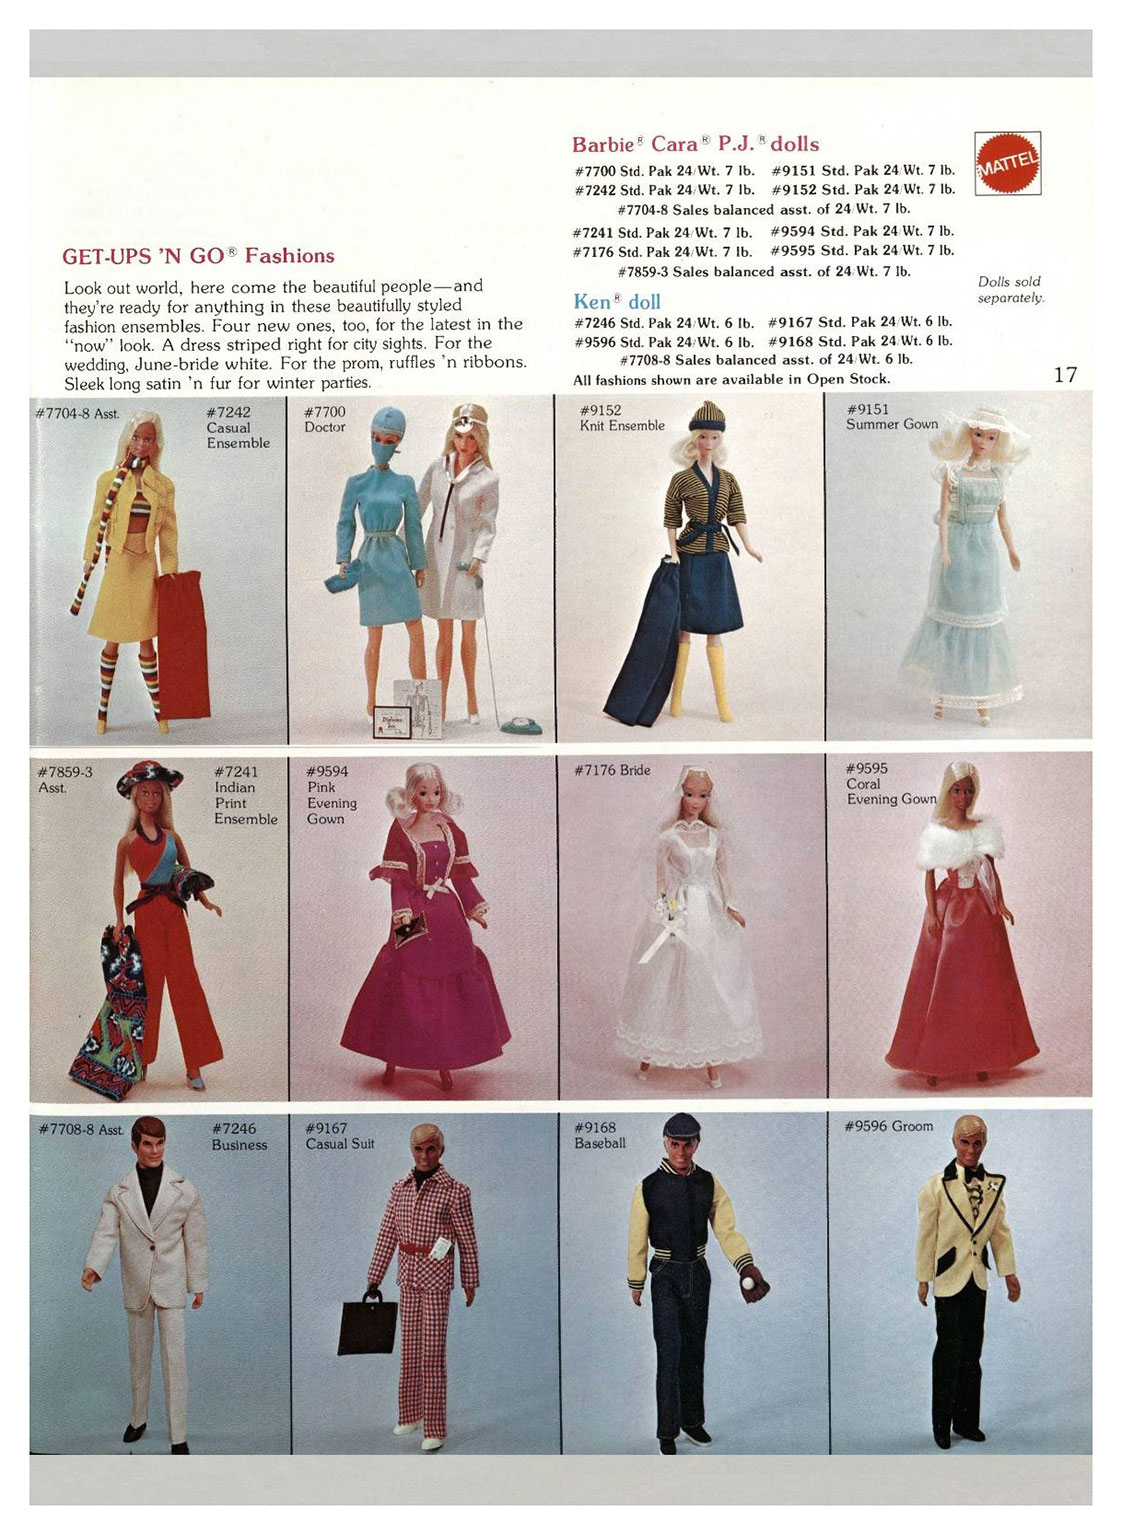 From 1976 Movin' with Mattel catalogue